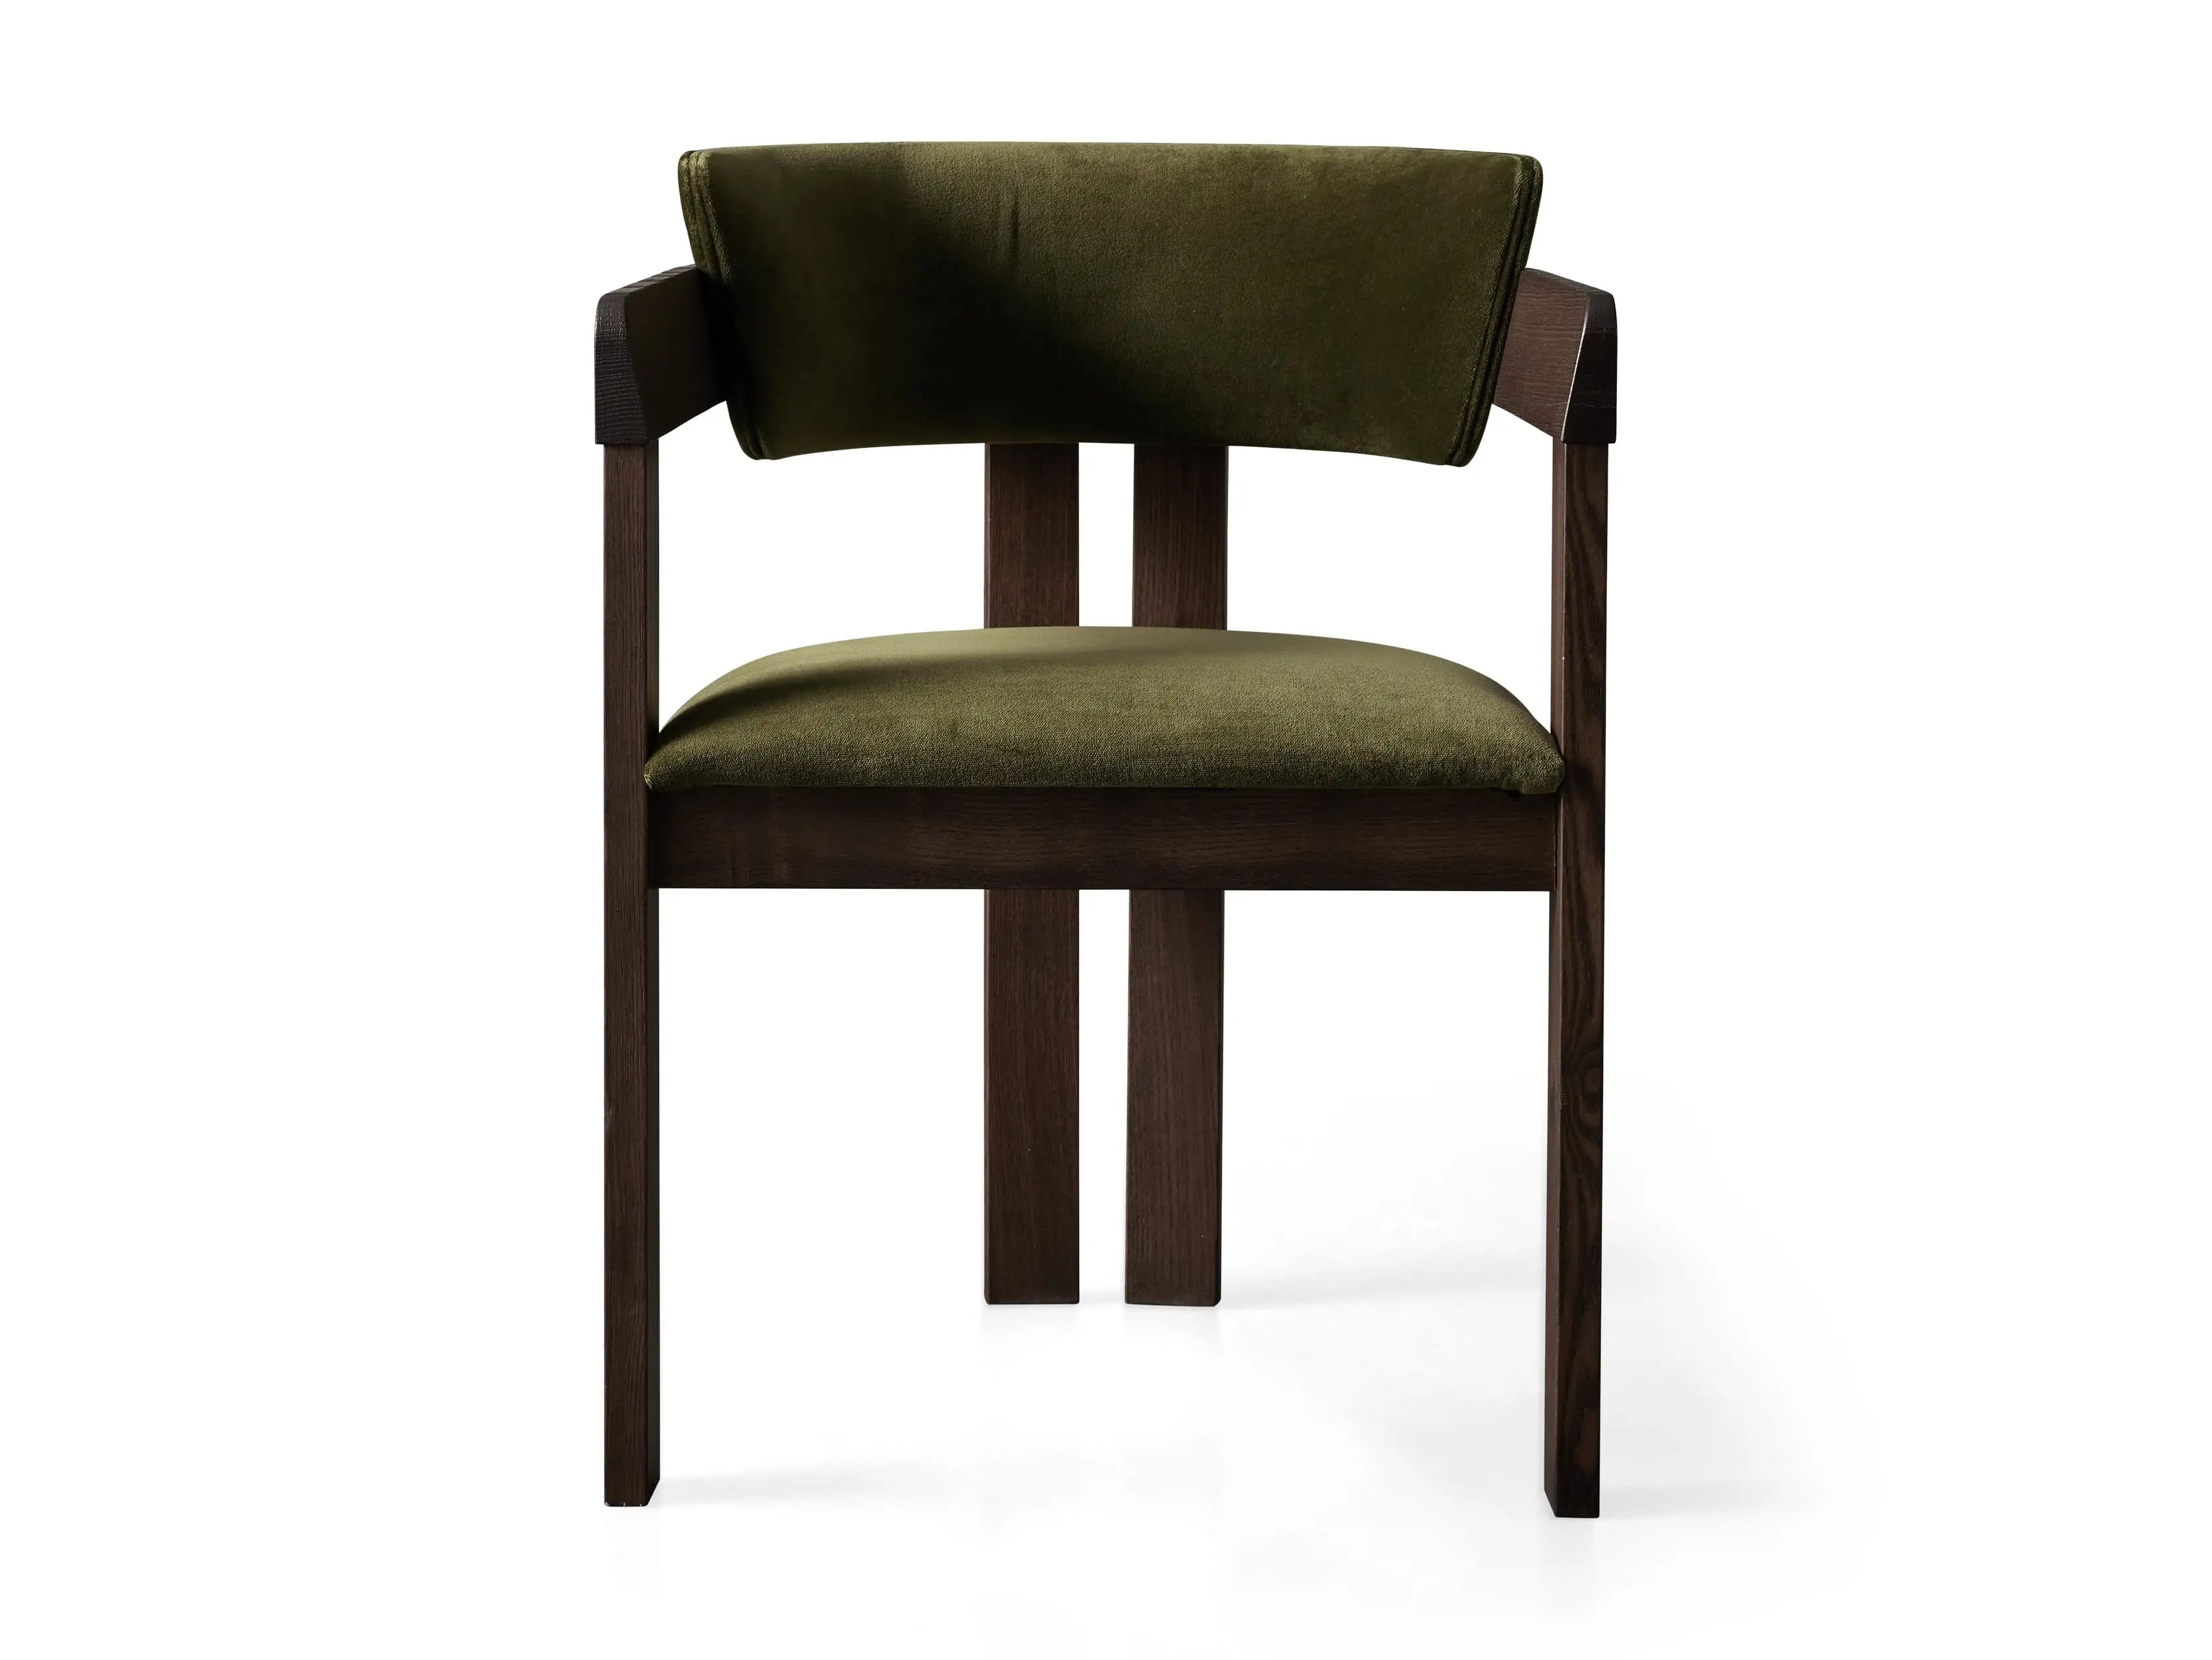 Rodin Dining Chair in  Vance Olive | Arhaus